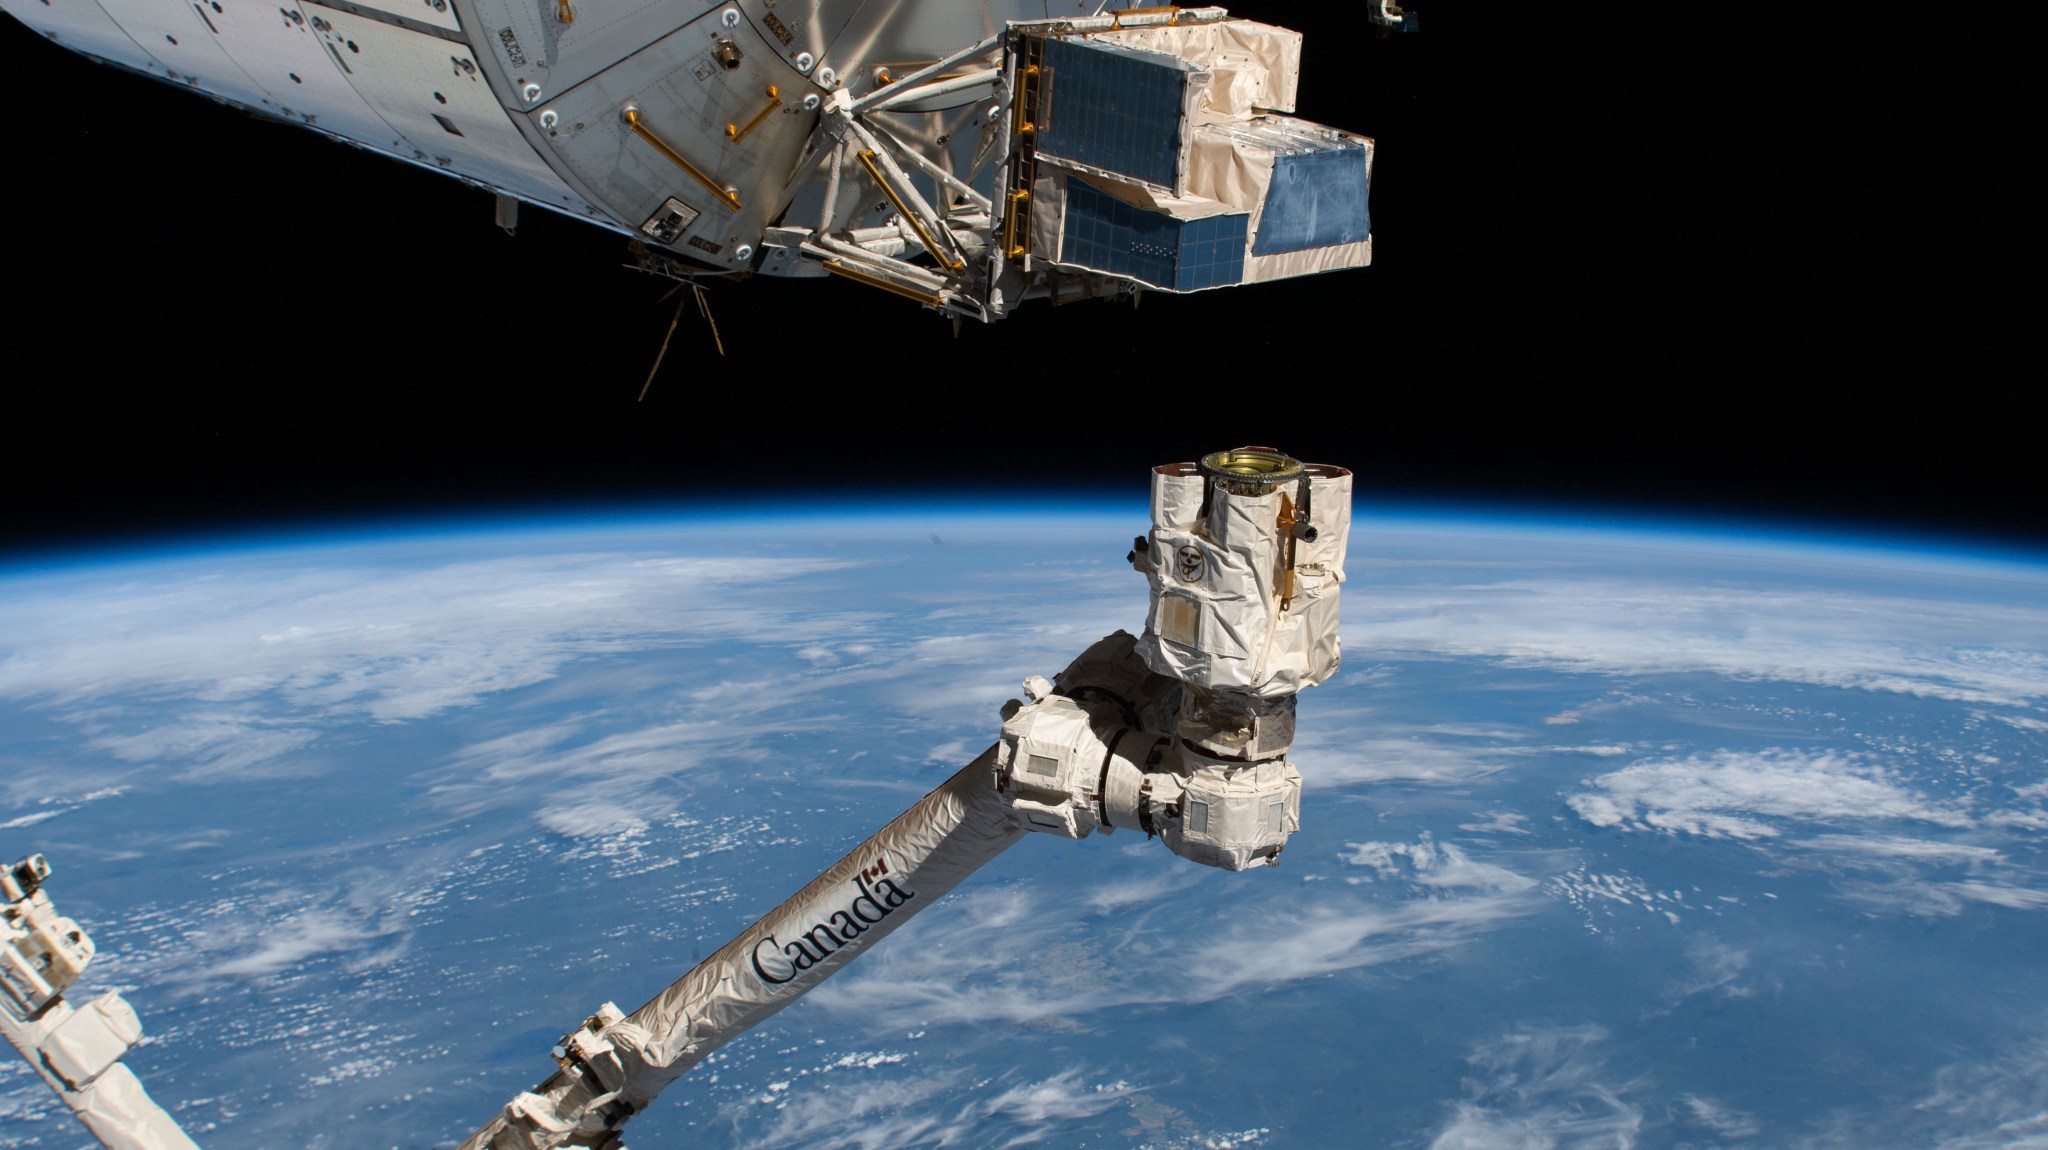 A long white robotic arm extends up from the bottom of the image with “Canada” printed in large letters on its side and sensors showing on the end. Above the arm, ASIM has white protective coverings around blue instruments. Below is the blue Earth with some thin scattered clouds.